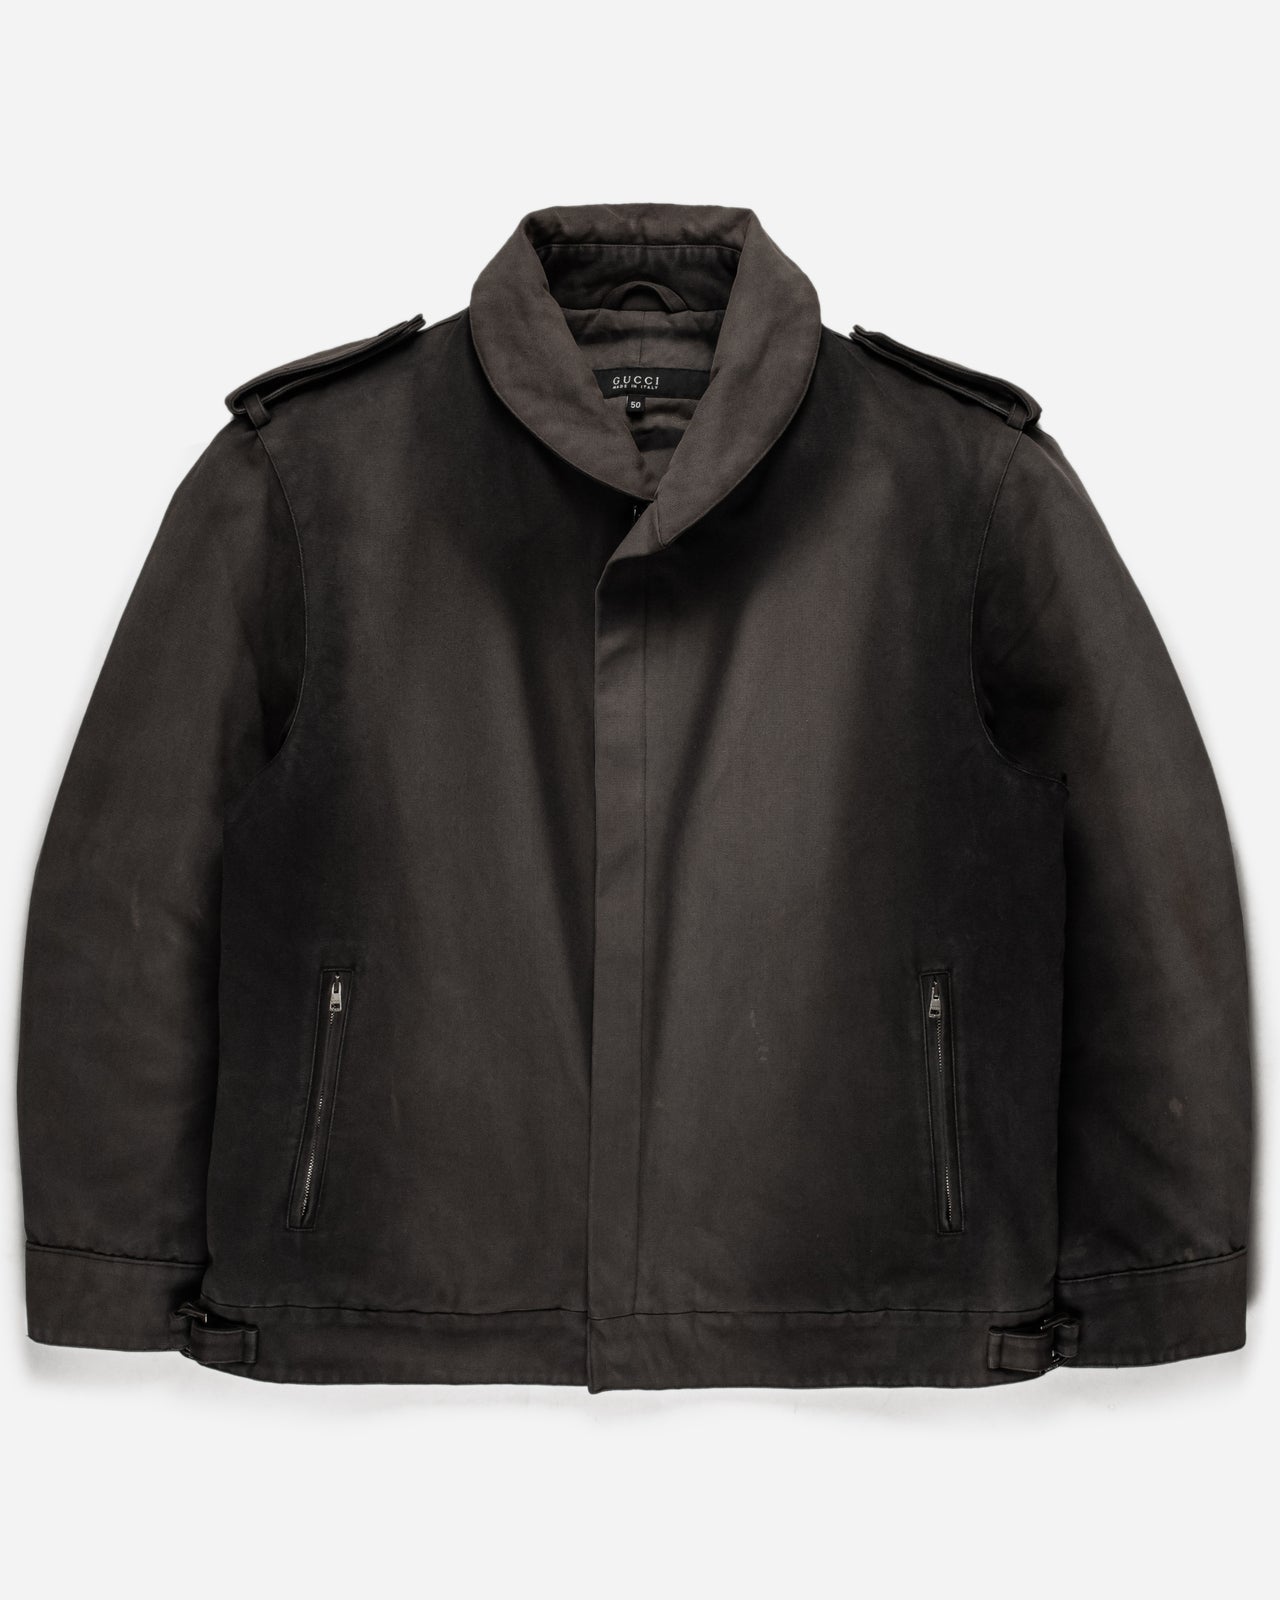 Gucci by Tom Ford Reversible Linen Bomber - SILVER LEAGUE